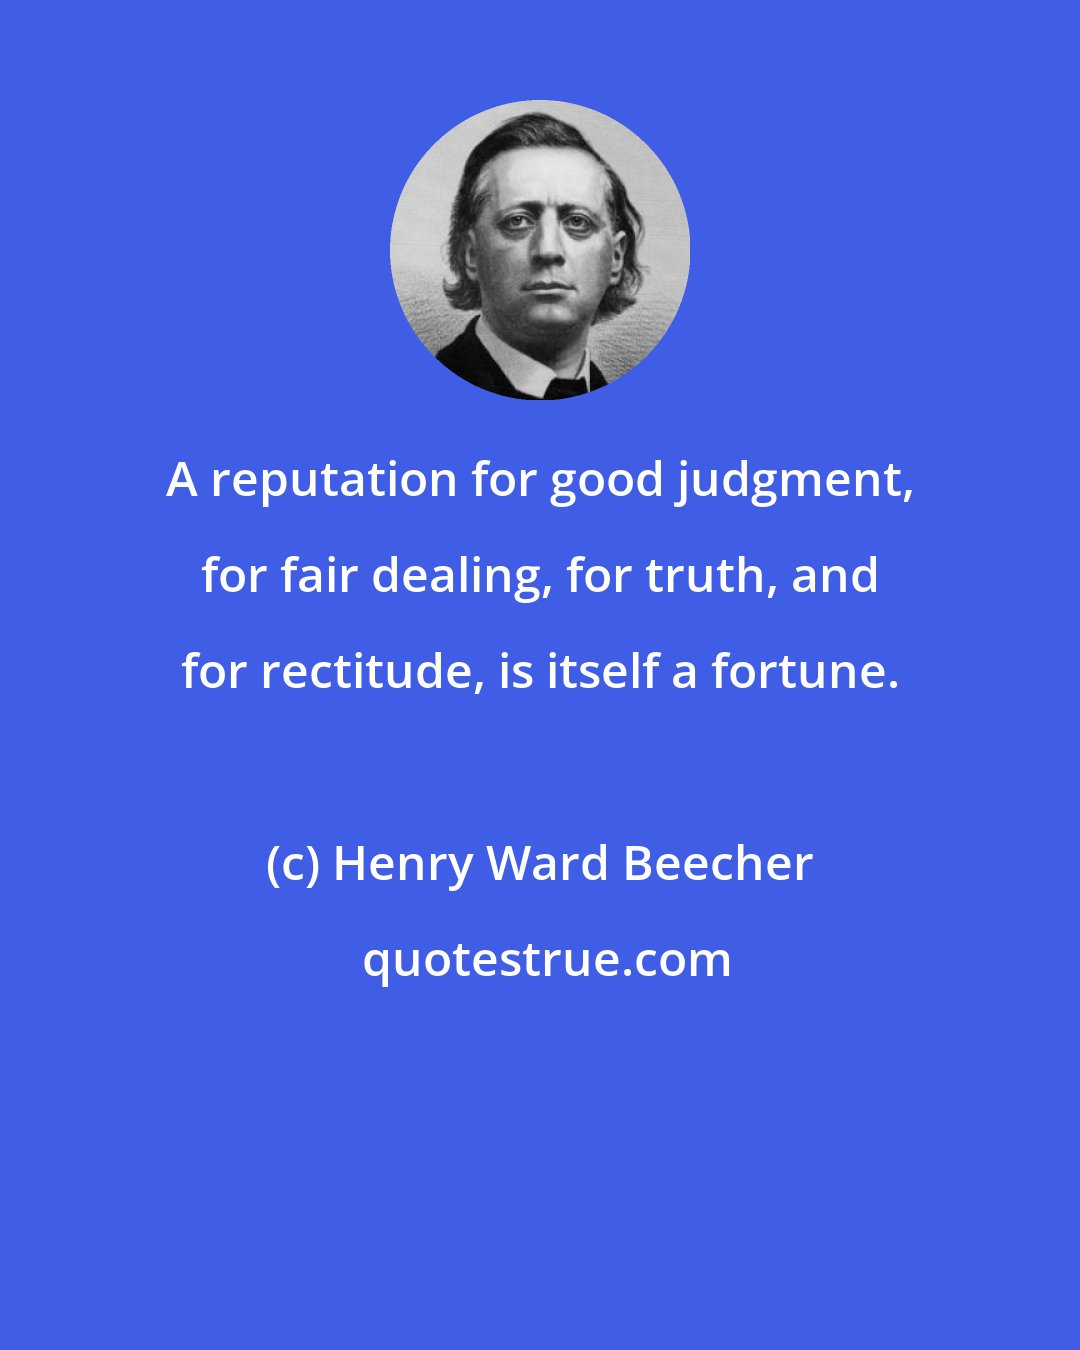 Henry Ward Beecher: A reputation for good judgment, for fair dealing, for truth, and for rectitude, is itself a fortune.